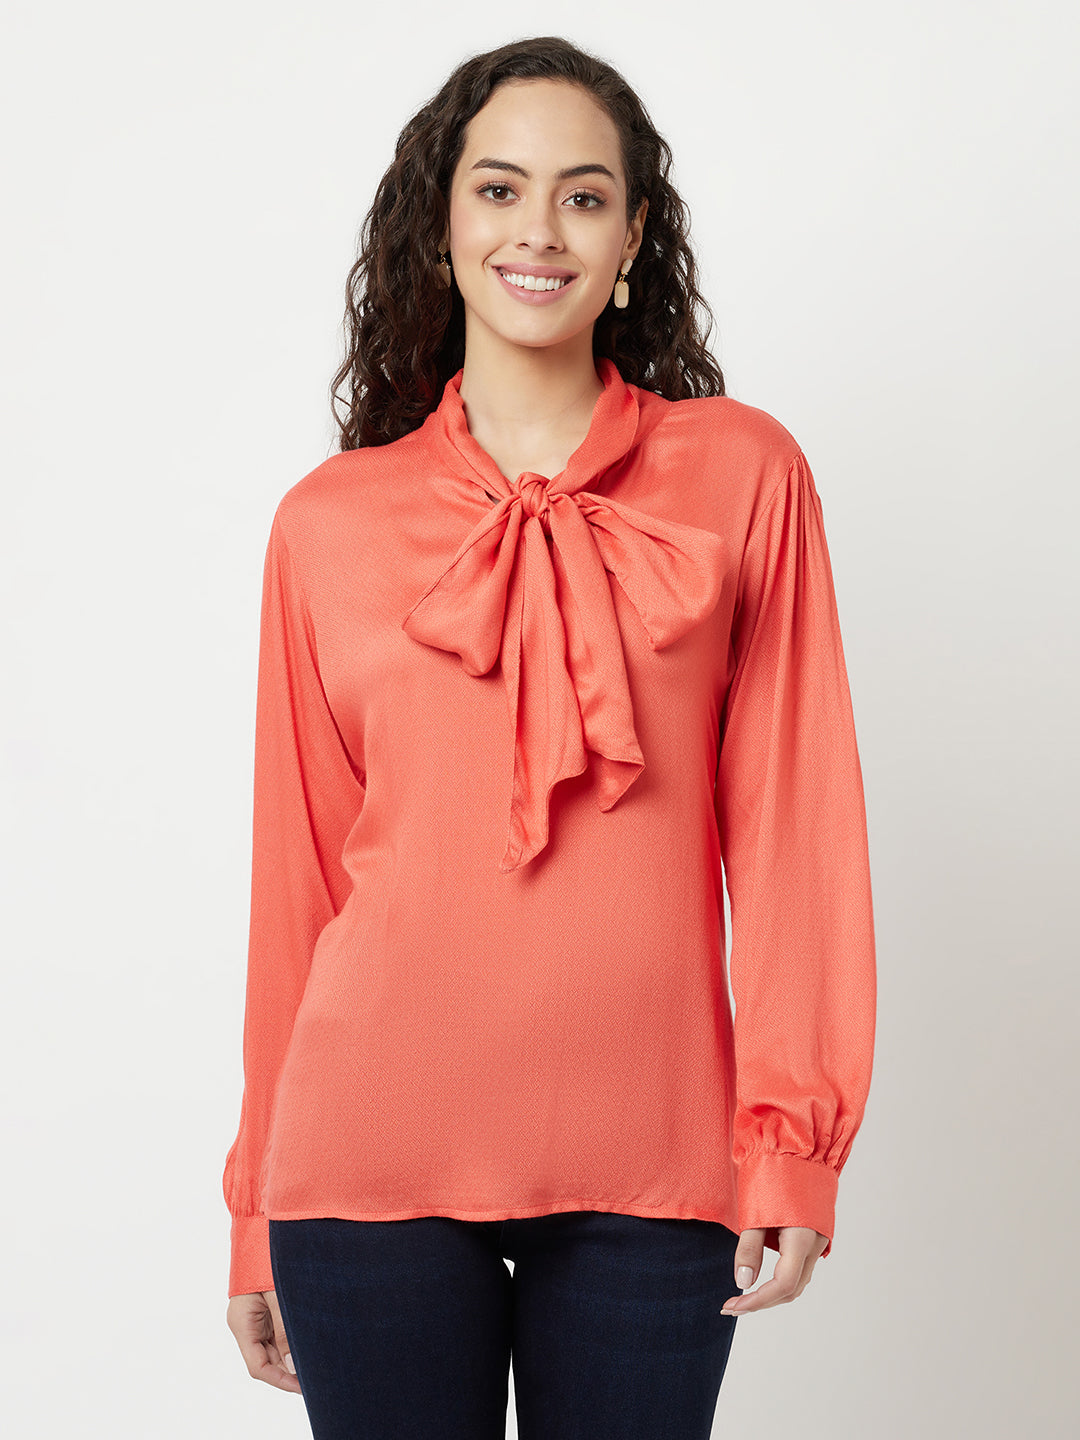 Coral Red Tie-Up Detail Top-Women Tops-Crimsoune Club